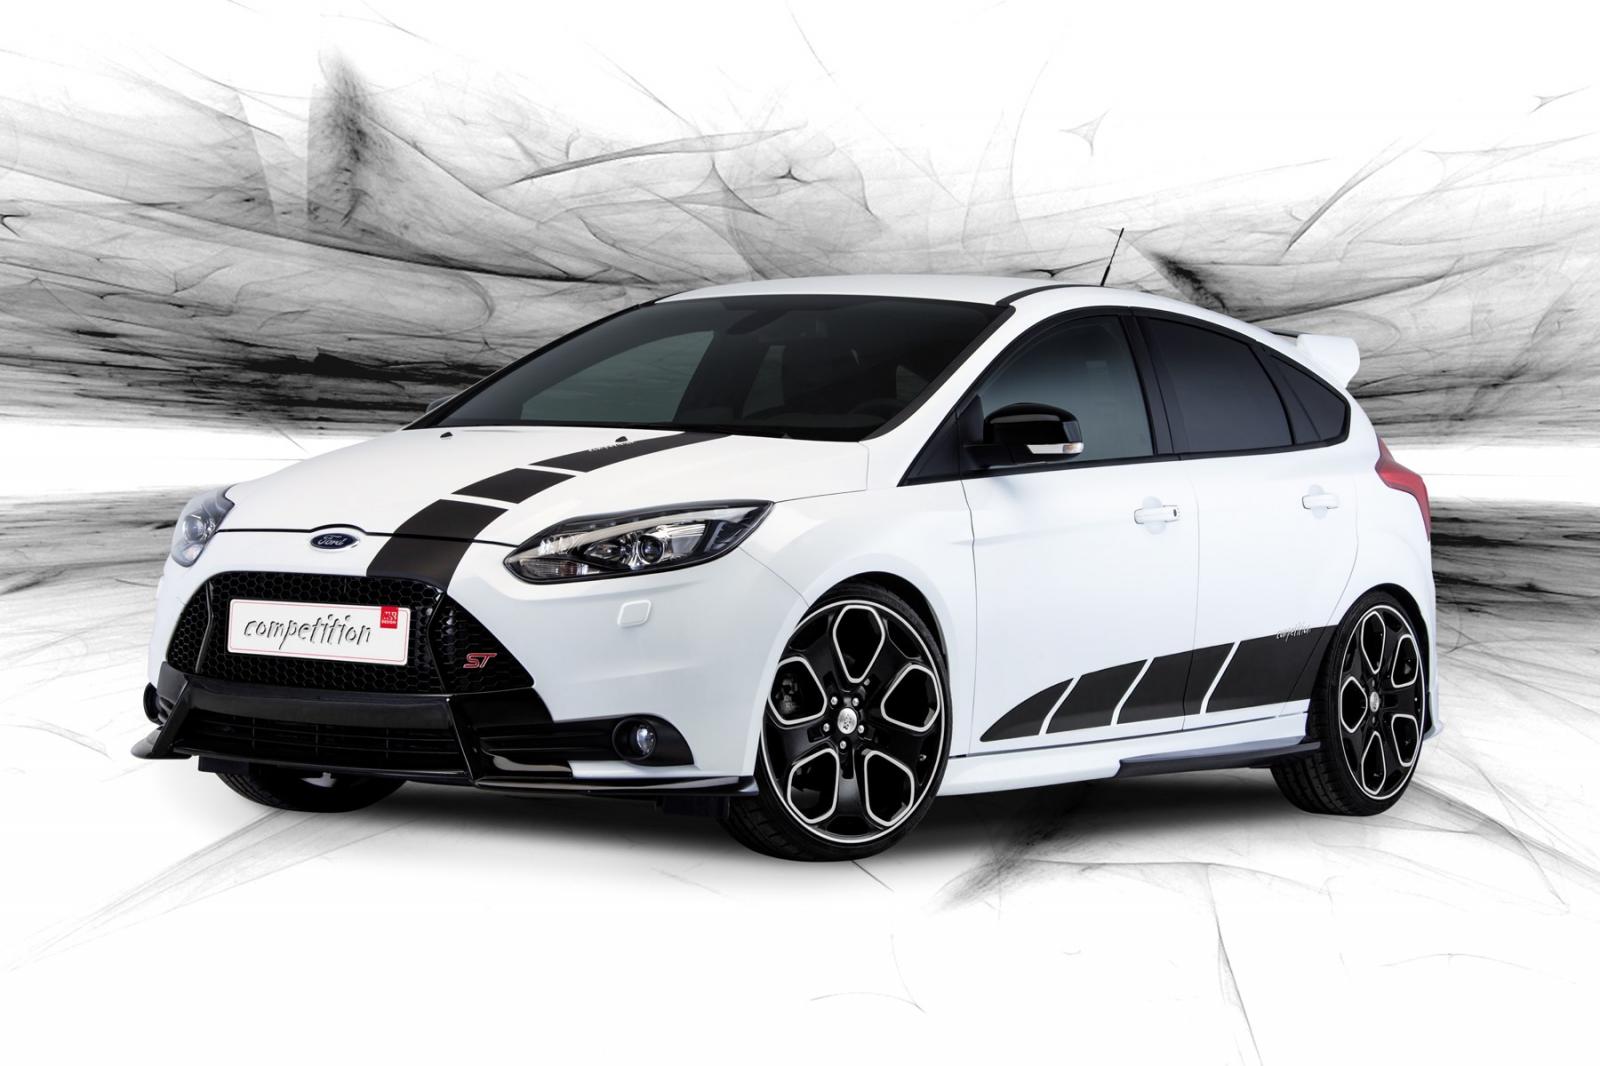 2013, Ms design, Ford, Focus, St, Tuning Wallpaper